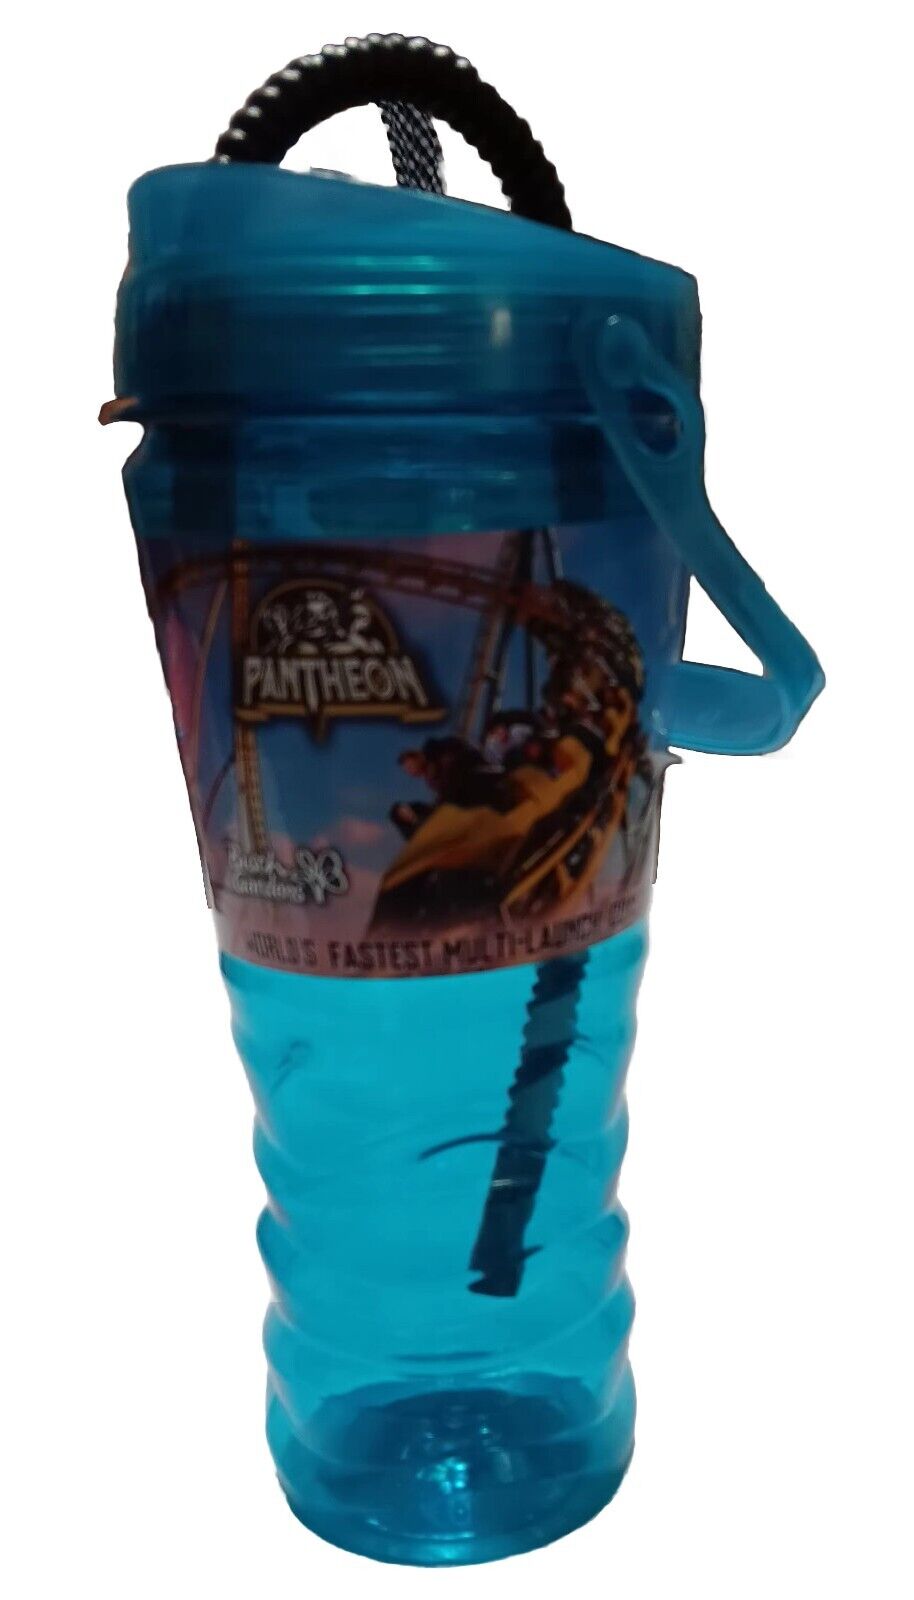 Pantheon Roller Coaster Plastic 24 oz Cup With Straw & Lid From Busch Gardens